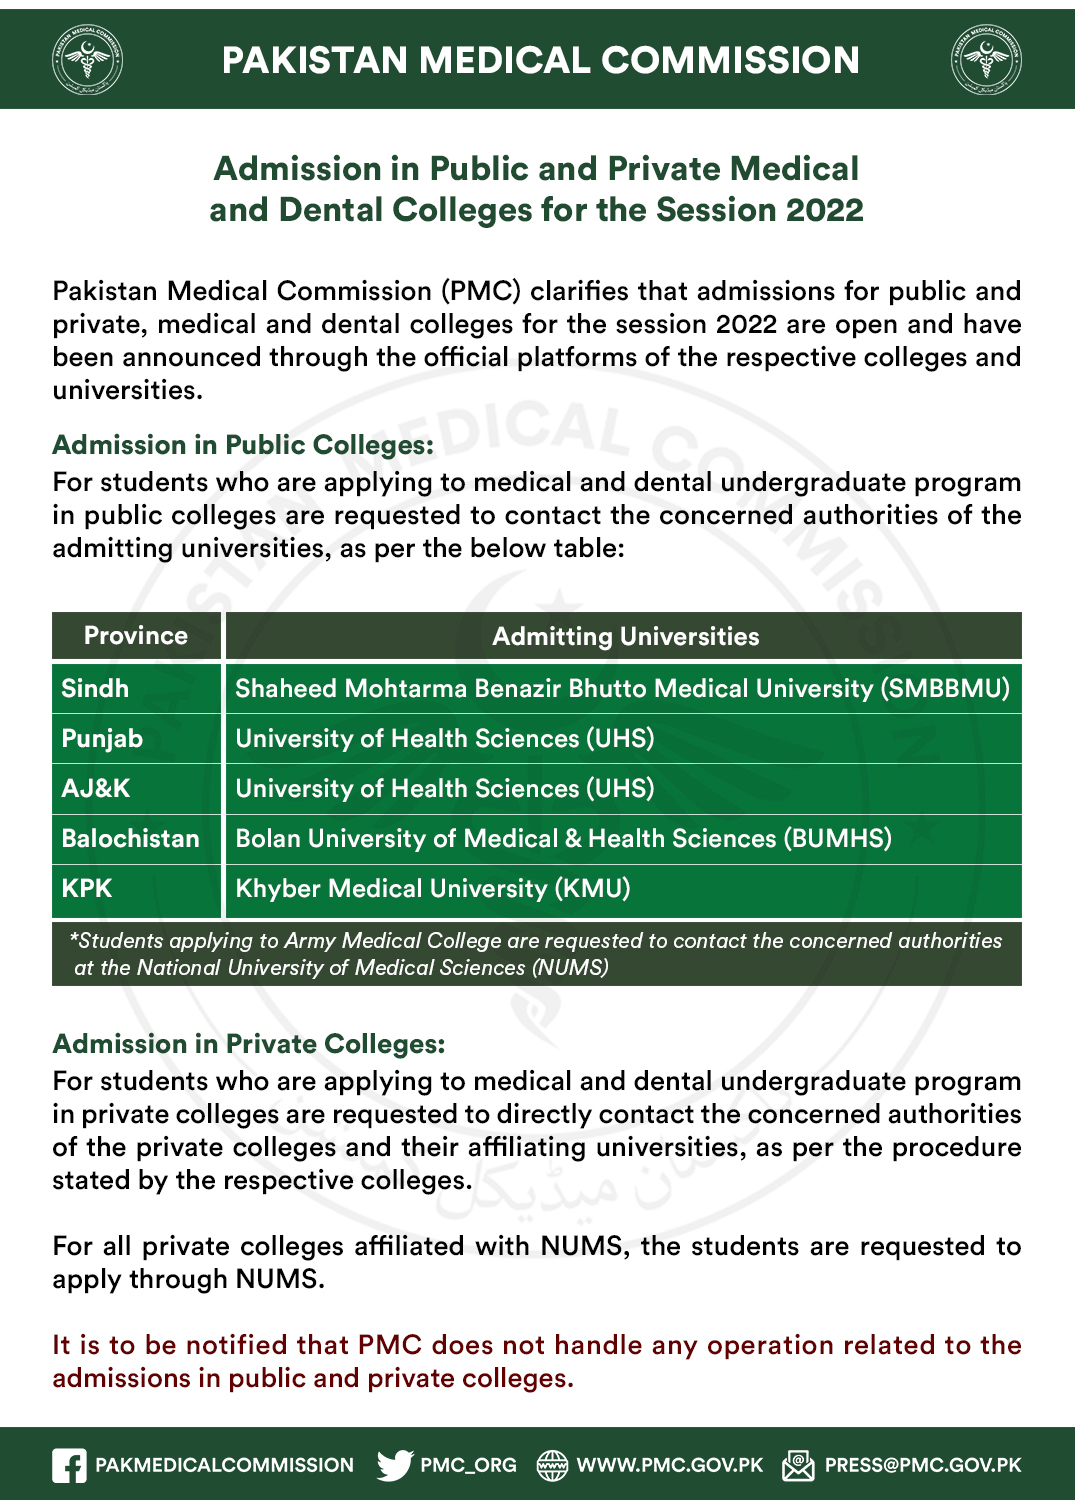 PMC Issues Instructions About Admission in Medical and Dental Universities